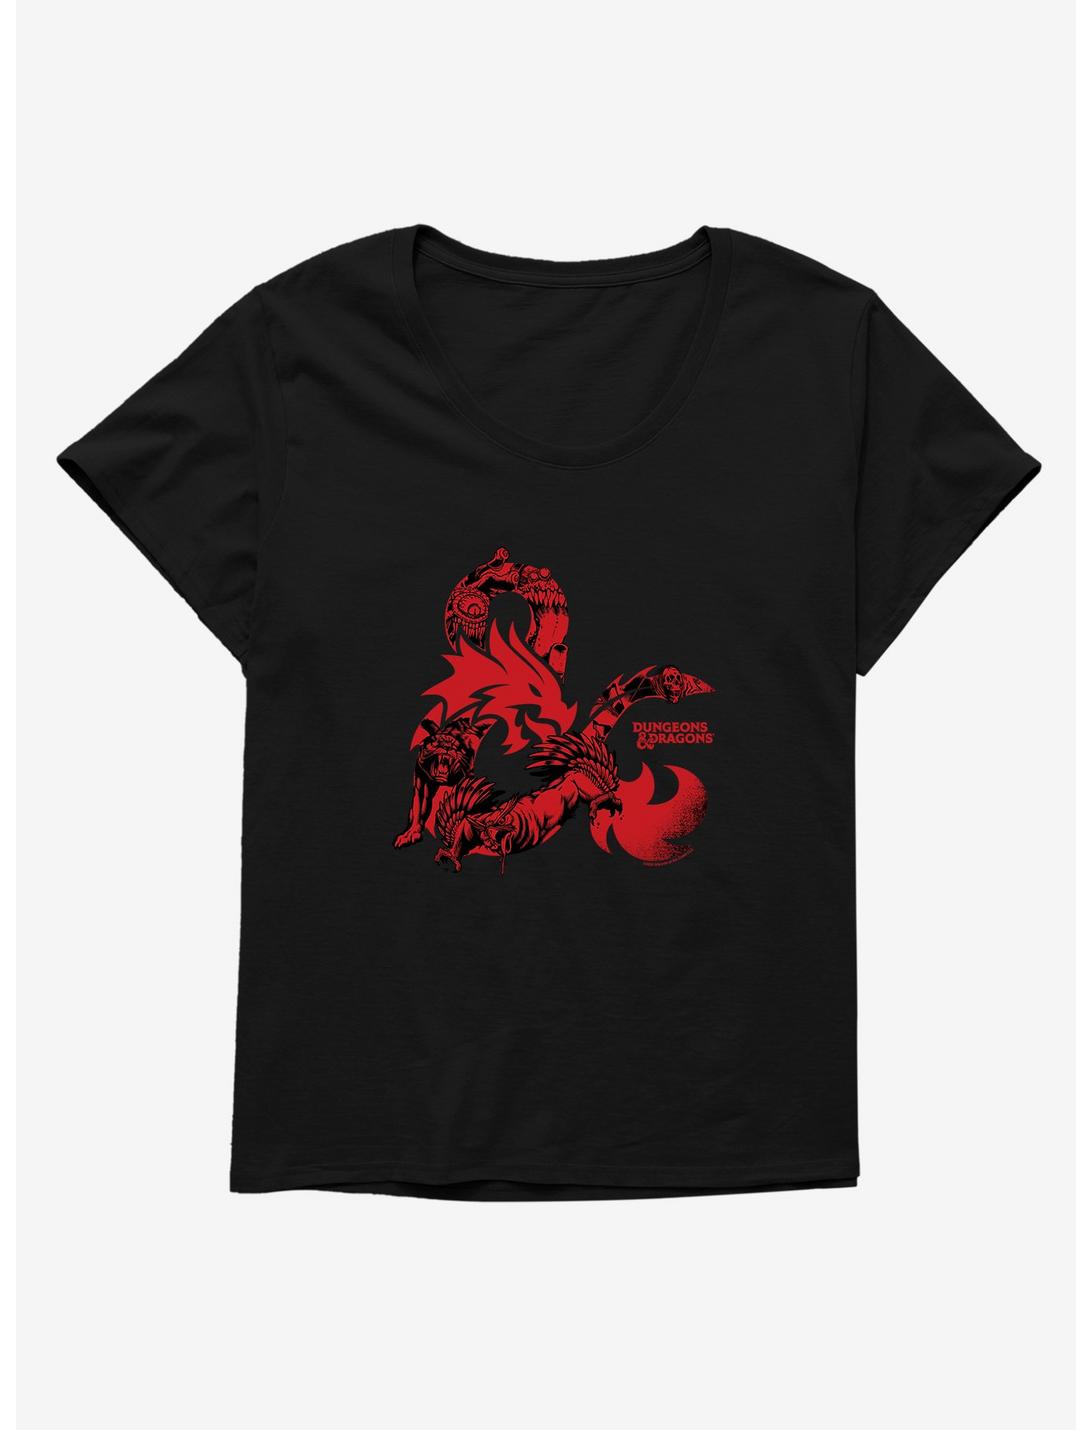 Dungeons & Dragons Red Ampersand Womens T-Shirt Plus Size, BLACK, hi-res